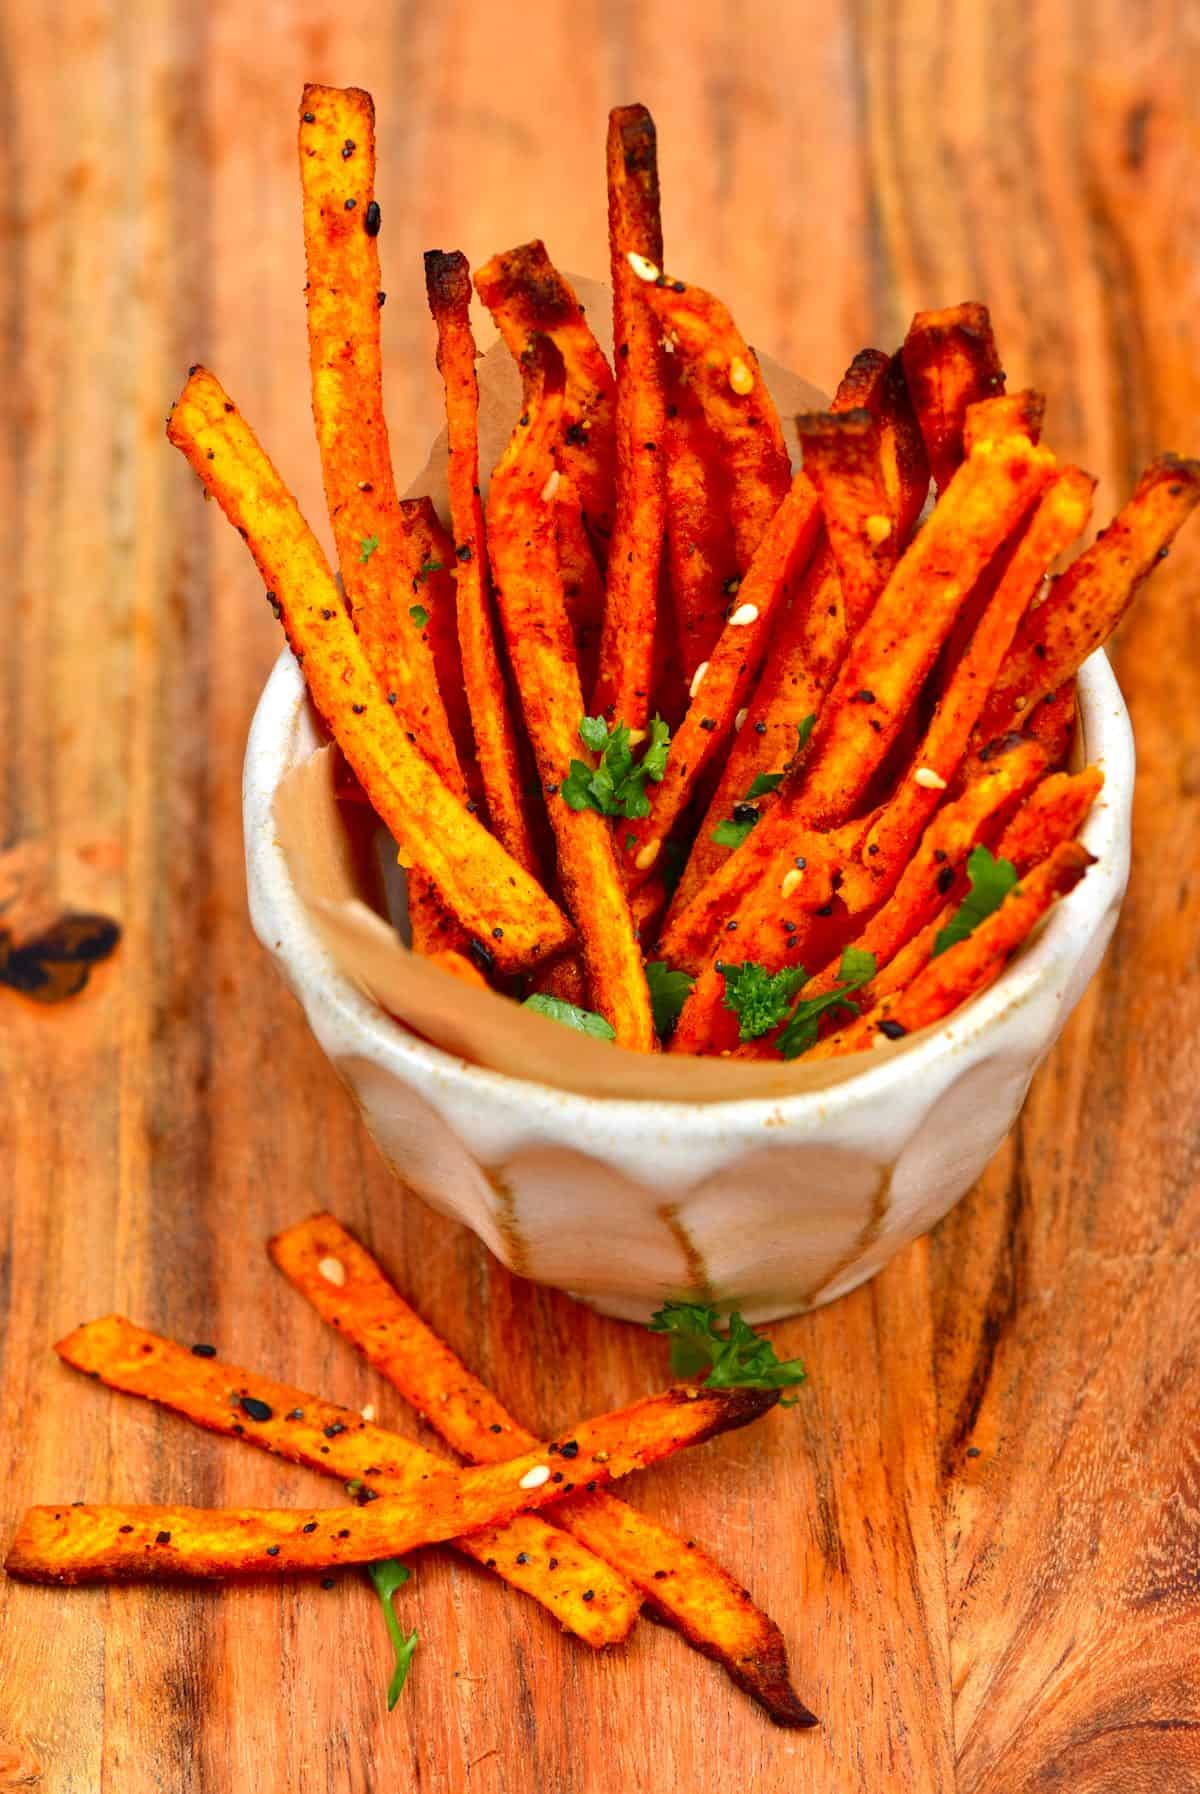 Sweet potato fries served in a small bowl